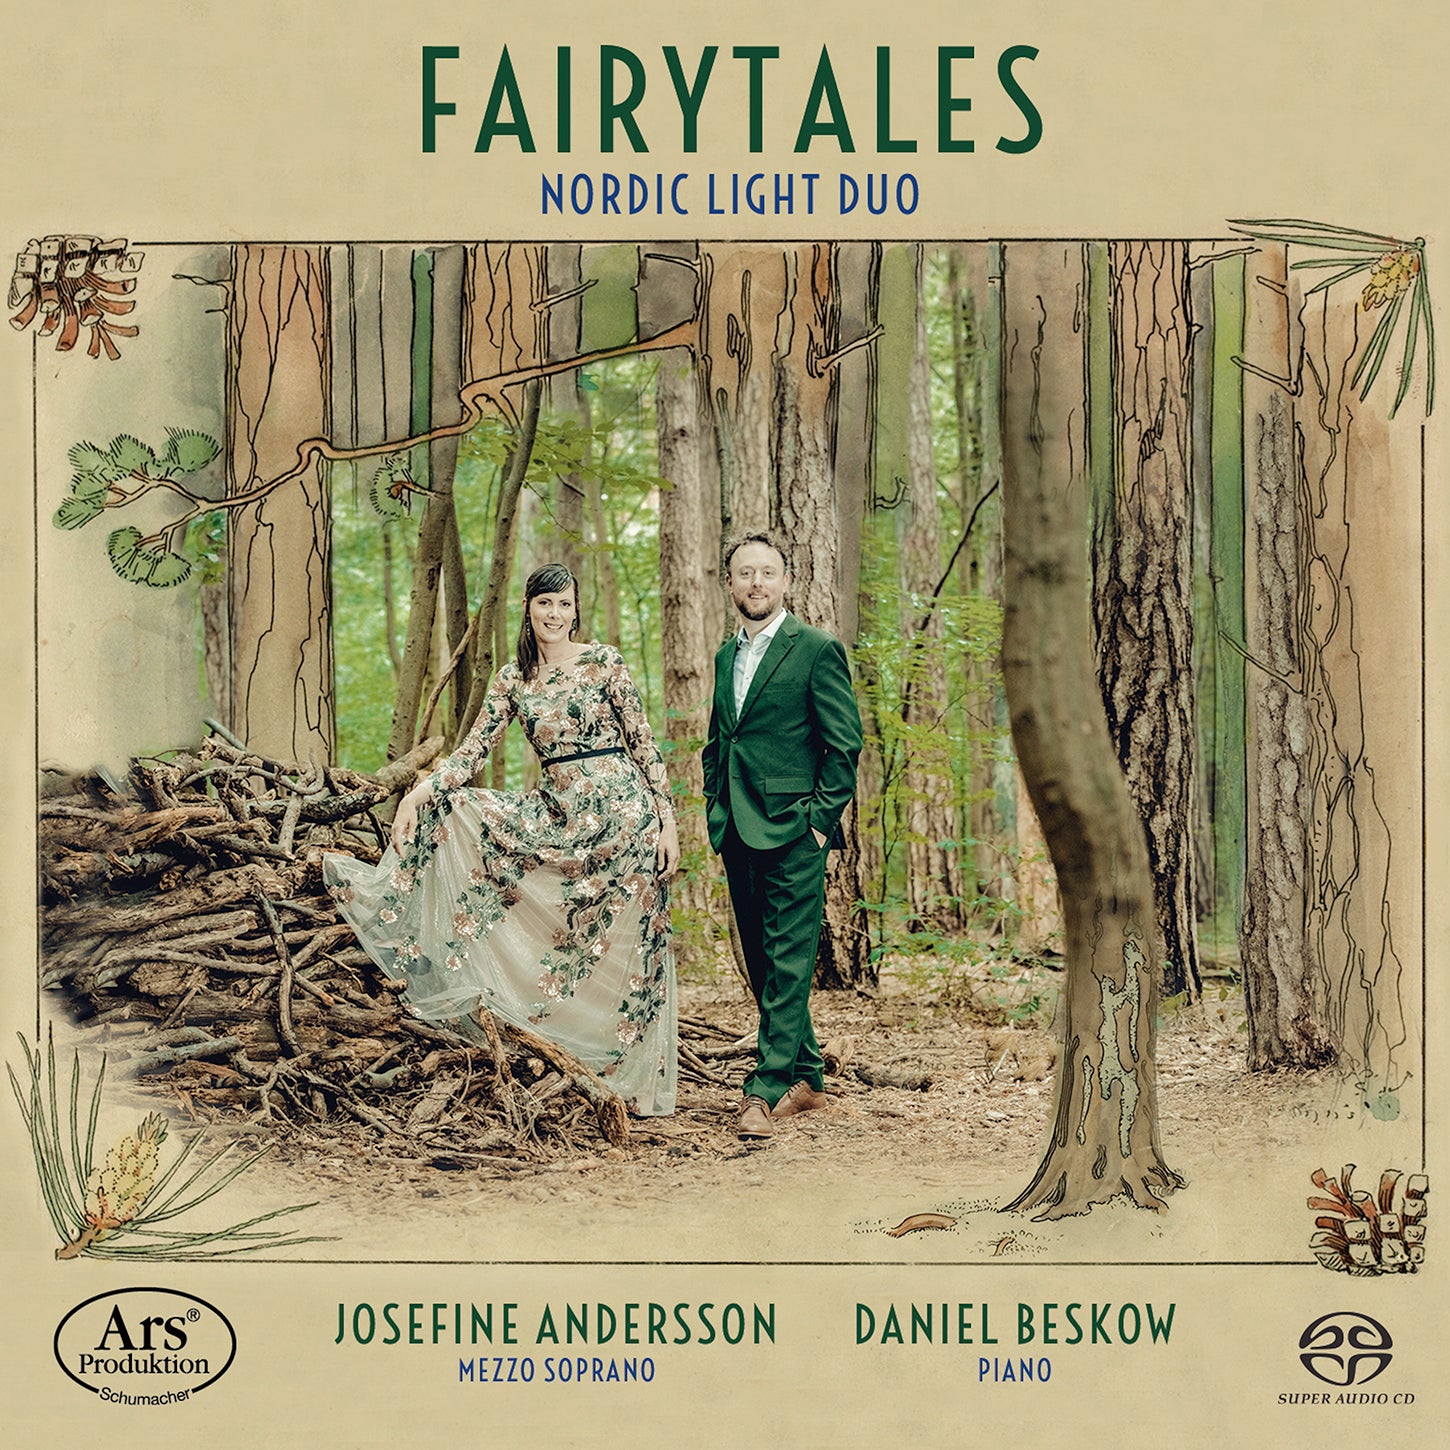 Fairytales: A Swedish Children's Book Set to Art Songs / Nordic Light Duo